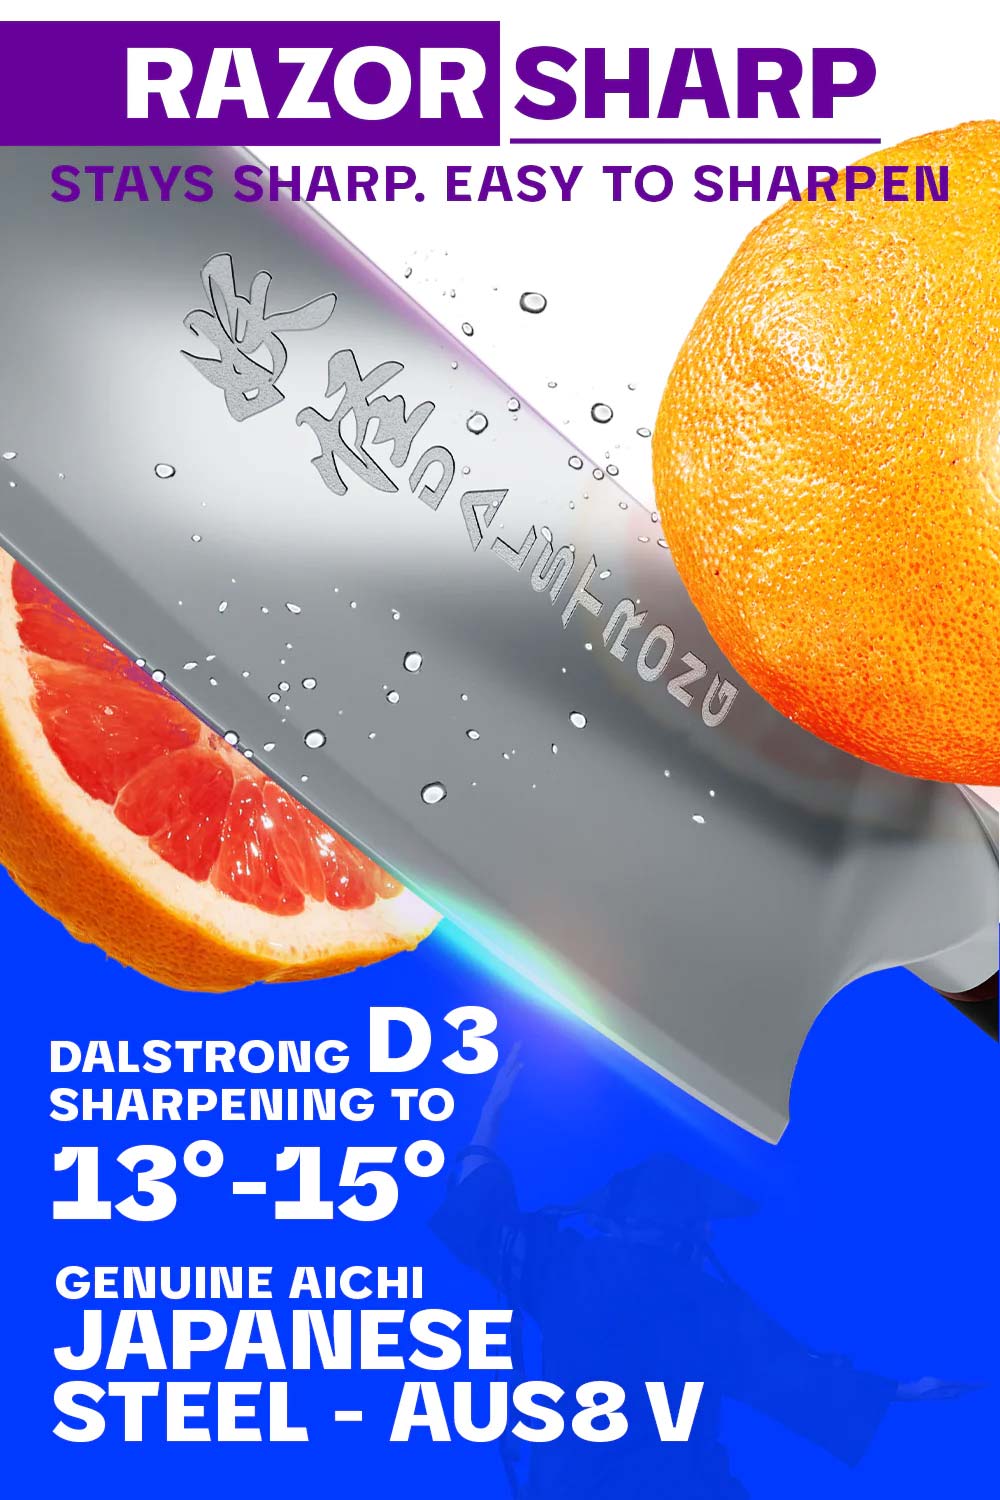 Superior Chef Stainless Steel 4 inch Grapefruit